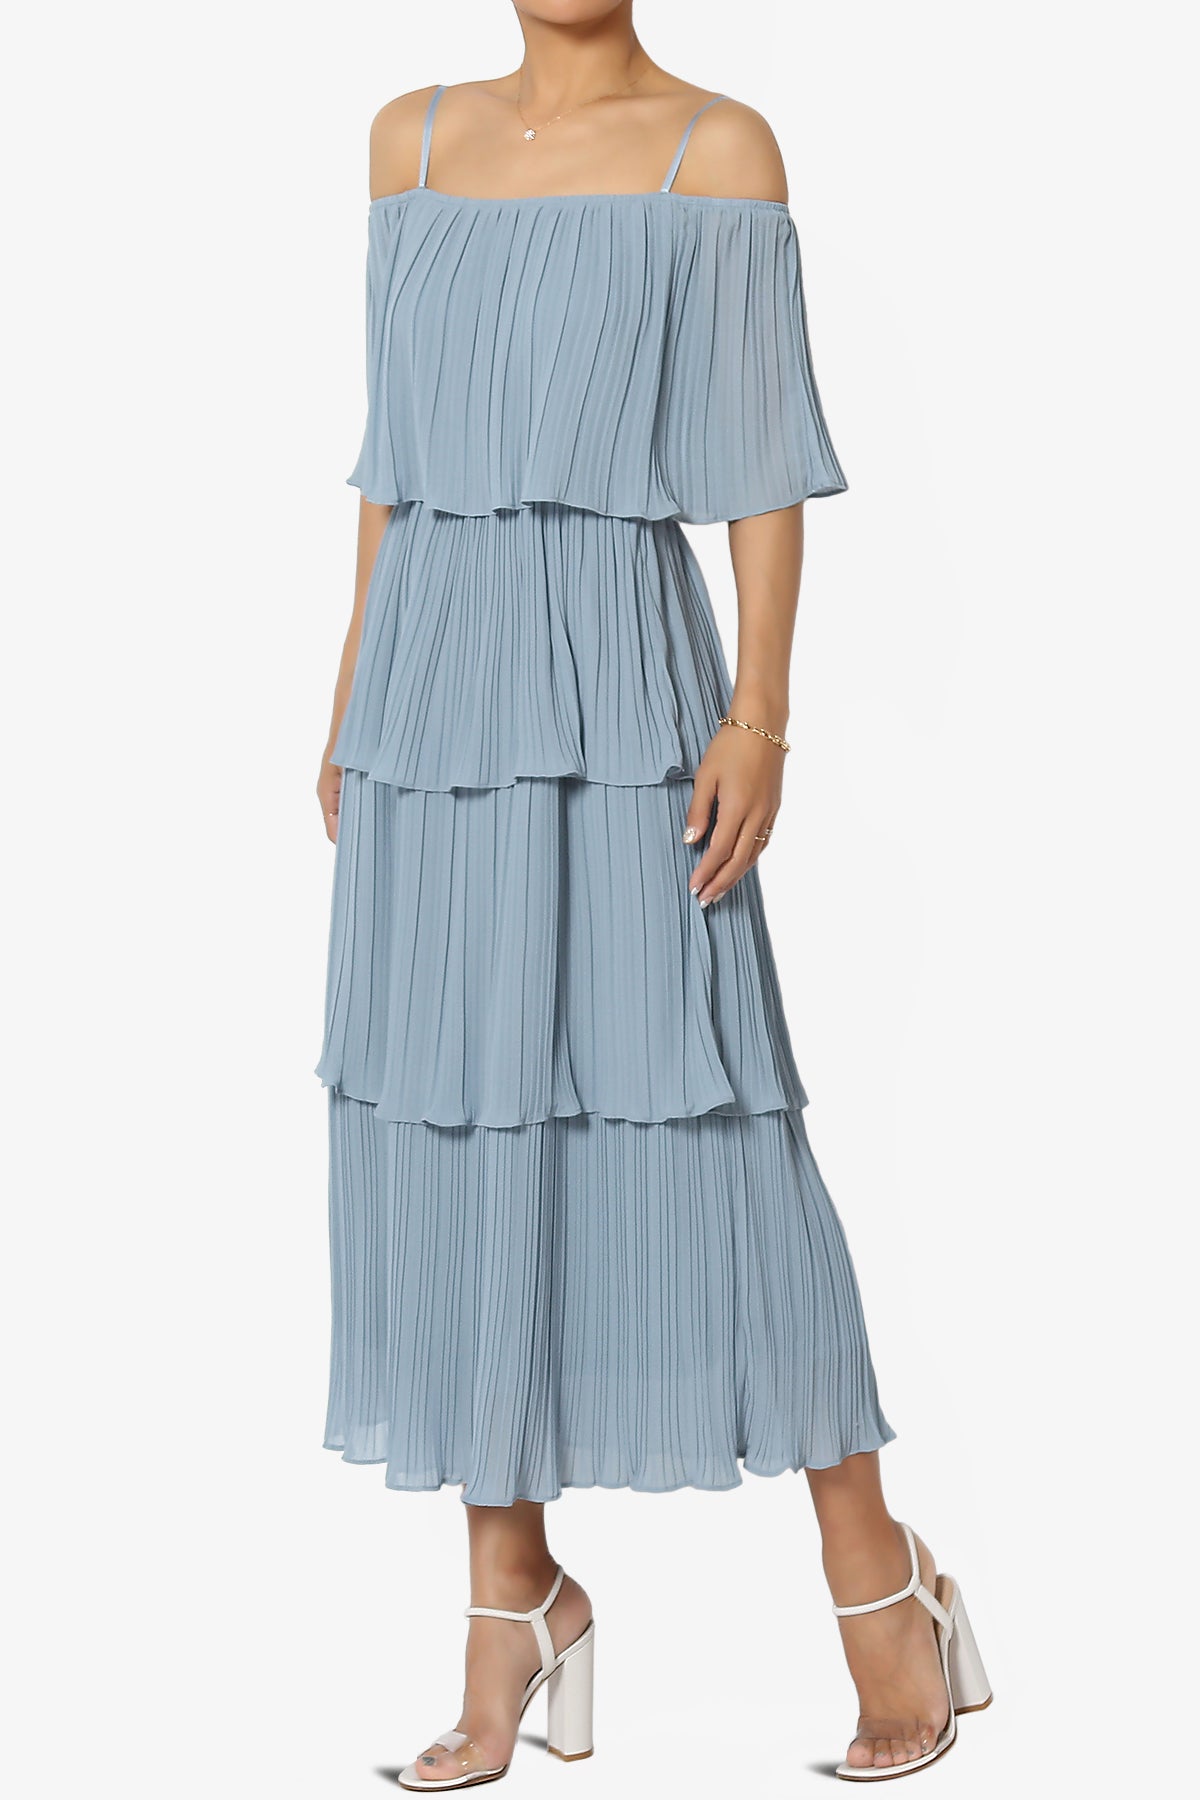 Load image into Gallery viewer, Kye Off Shoulder Tiered Dress in Dusty Blue
